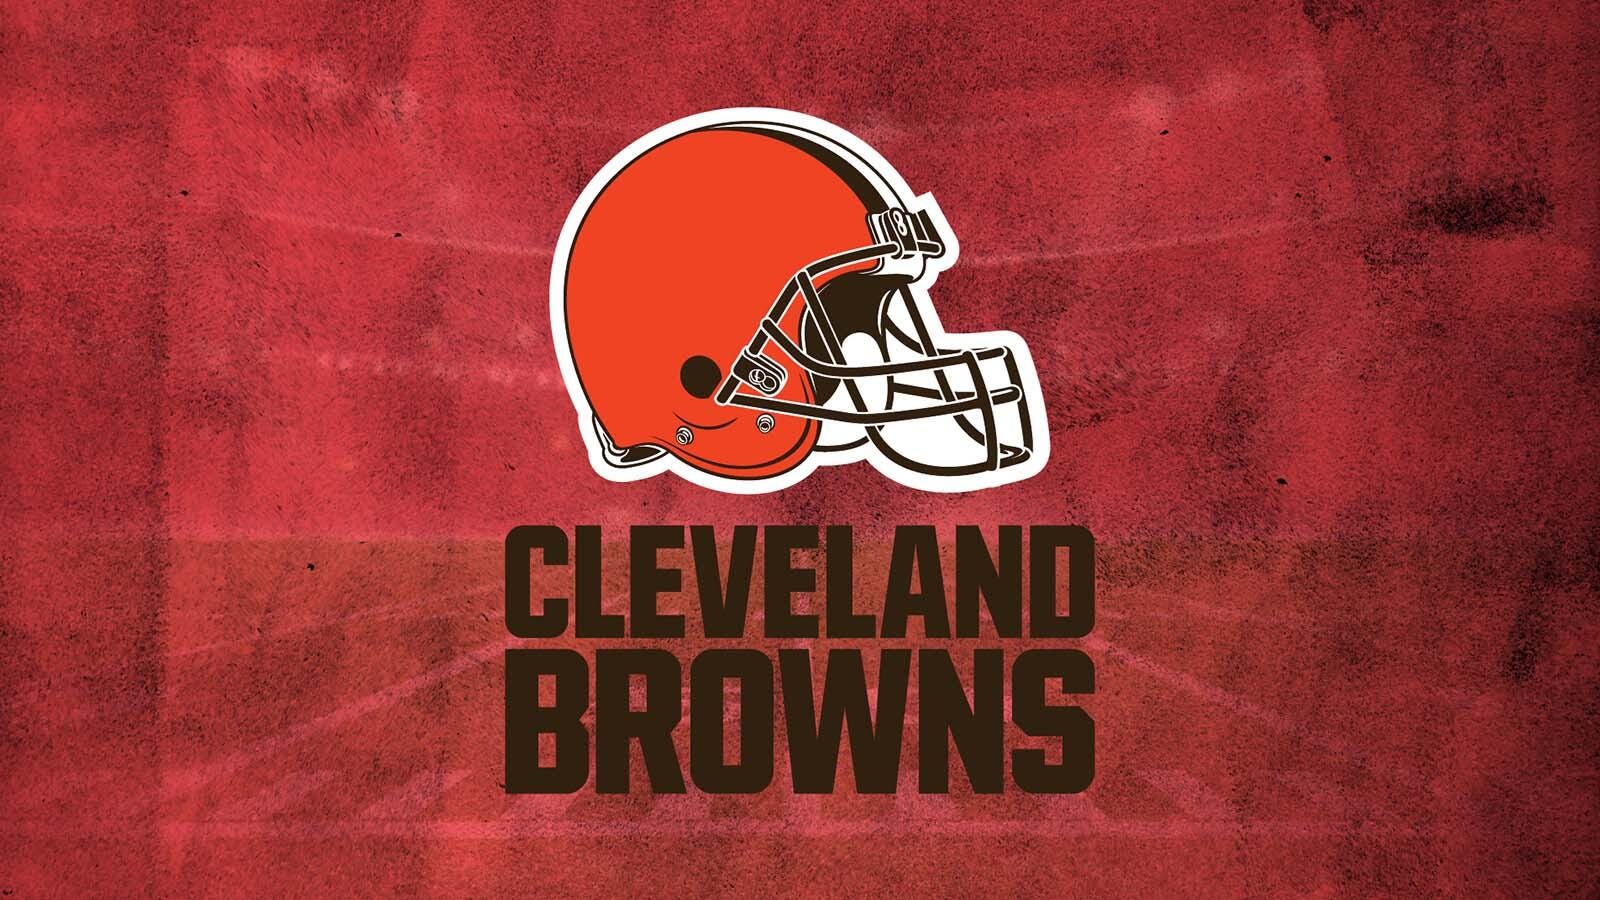 what channel does the cleveland browns game come on today